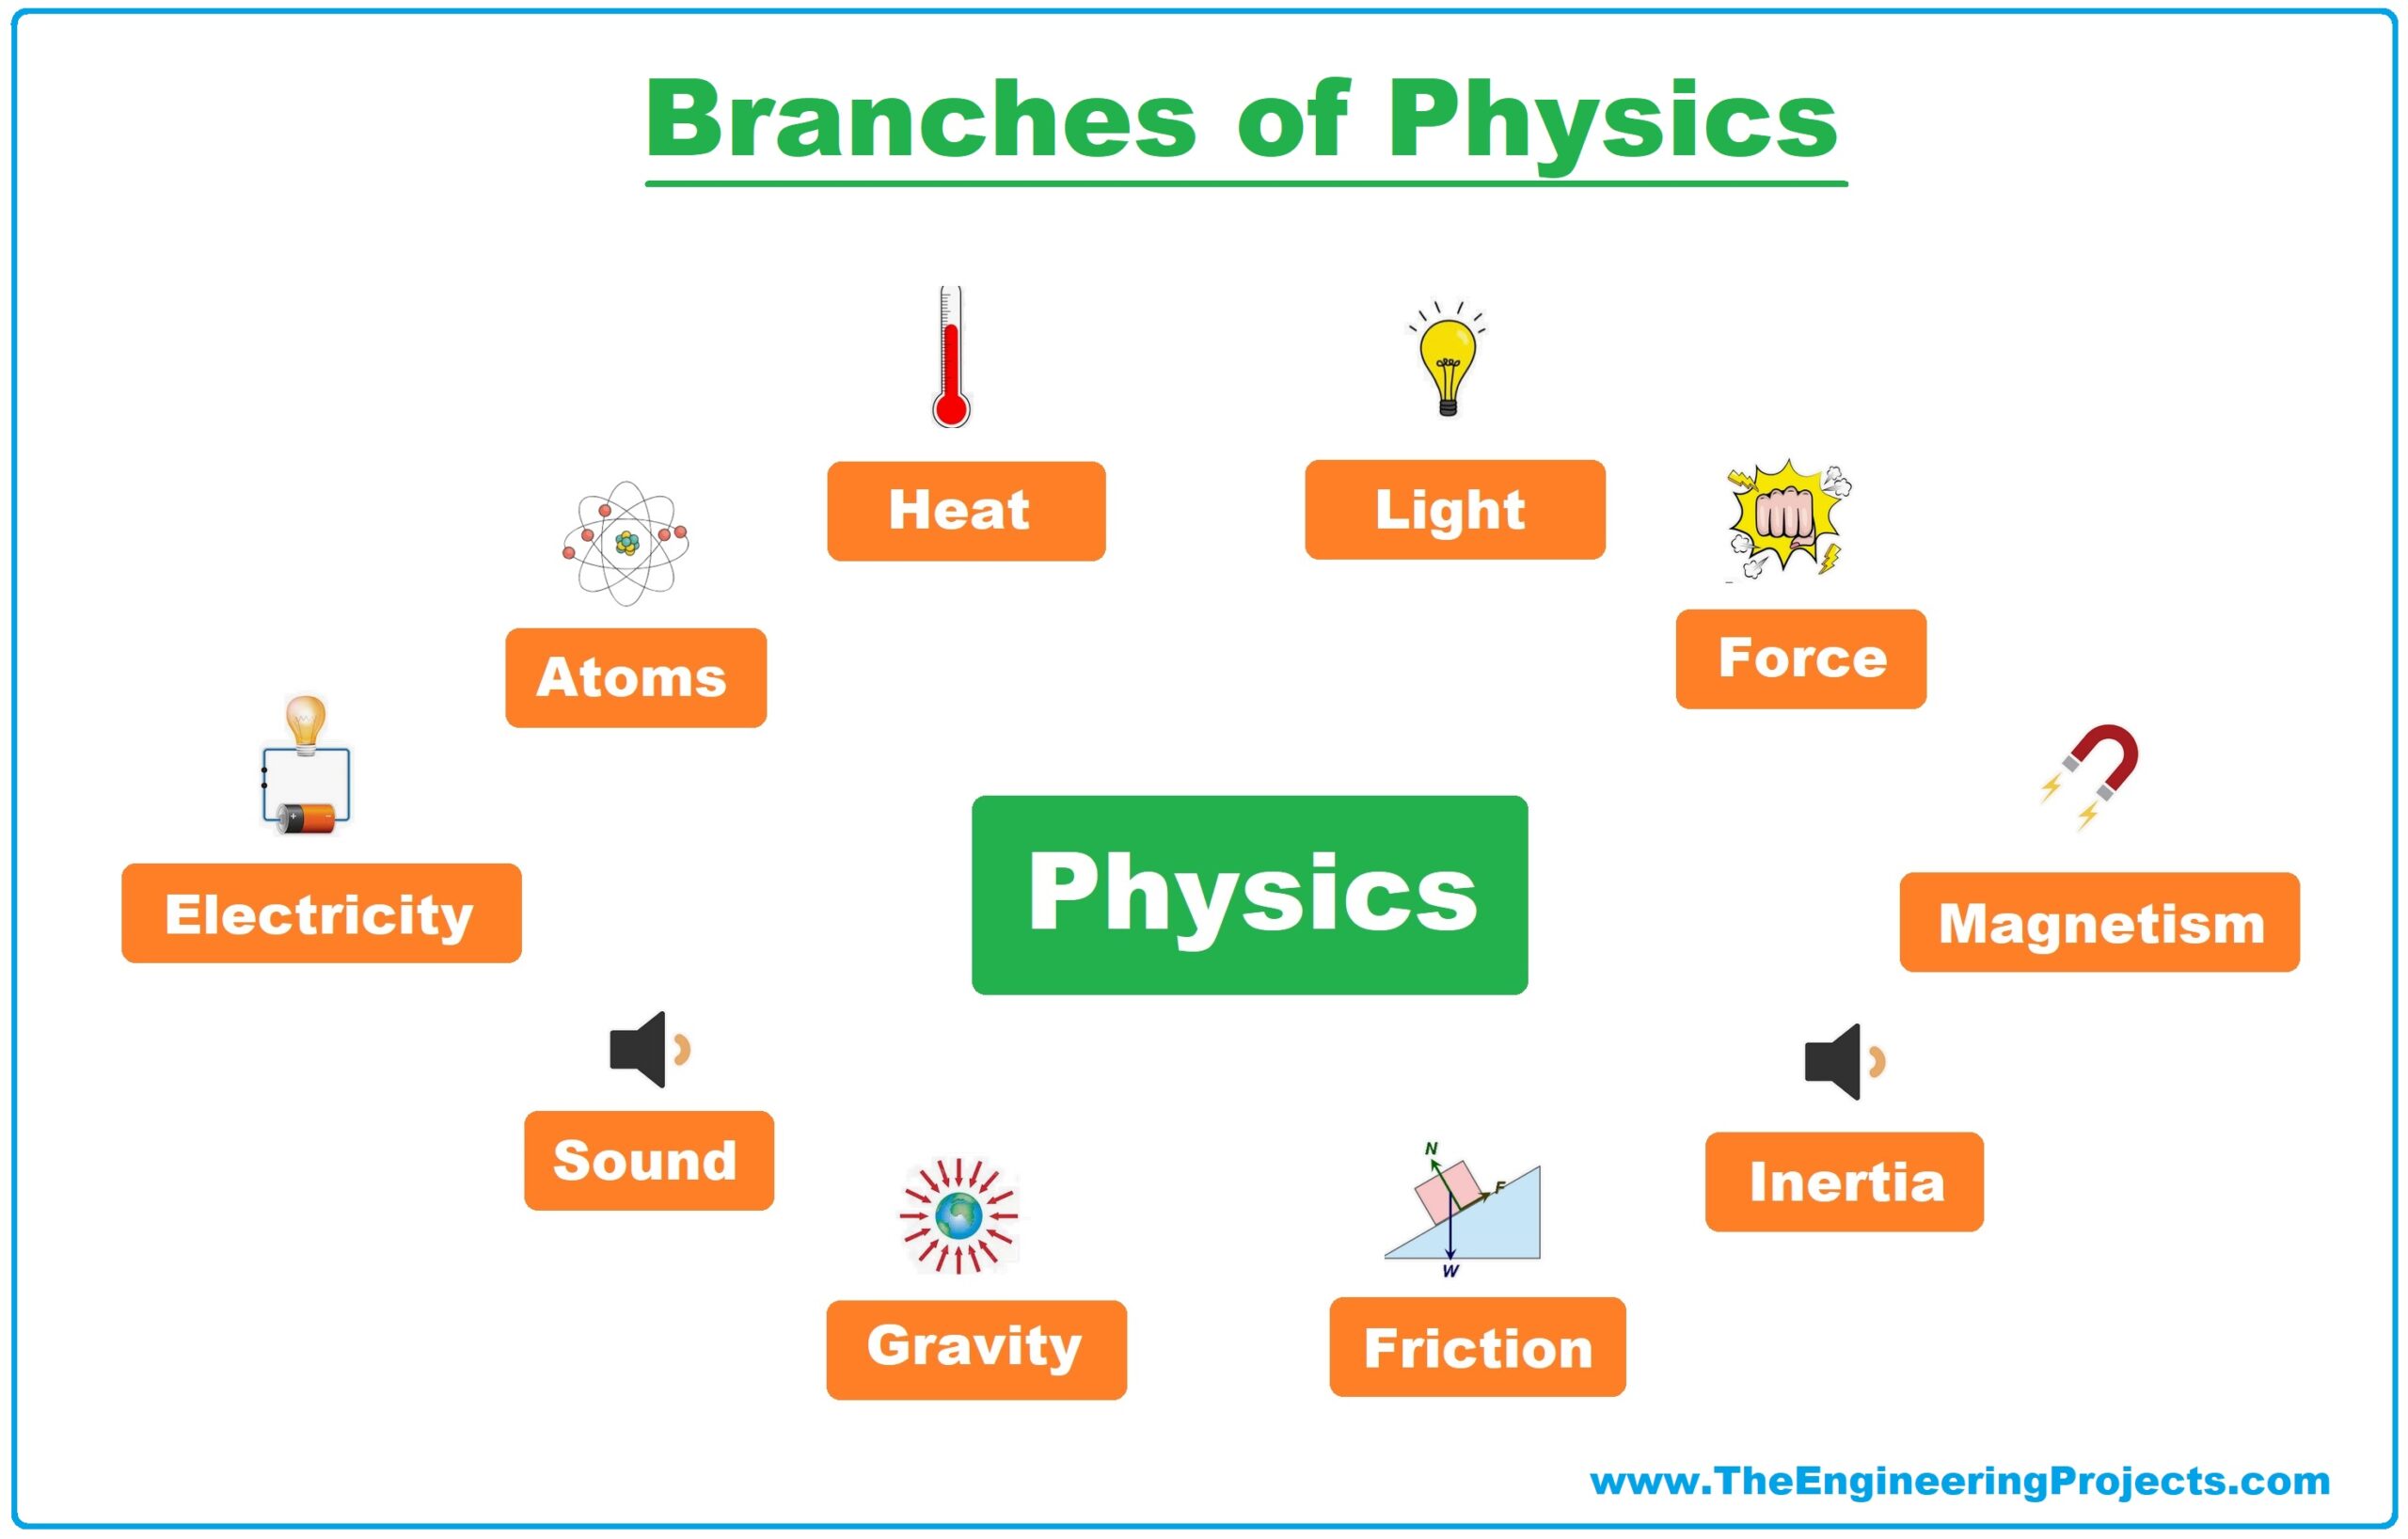 Physics, what is Physics, Physics branches, why is Physics important, physics definition, physics books, physics scientists, physicists